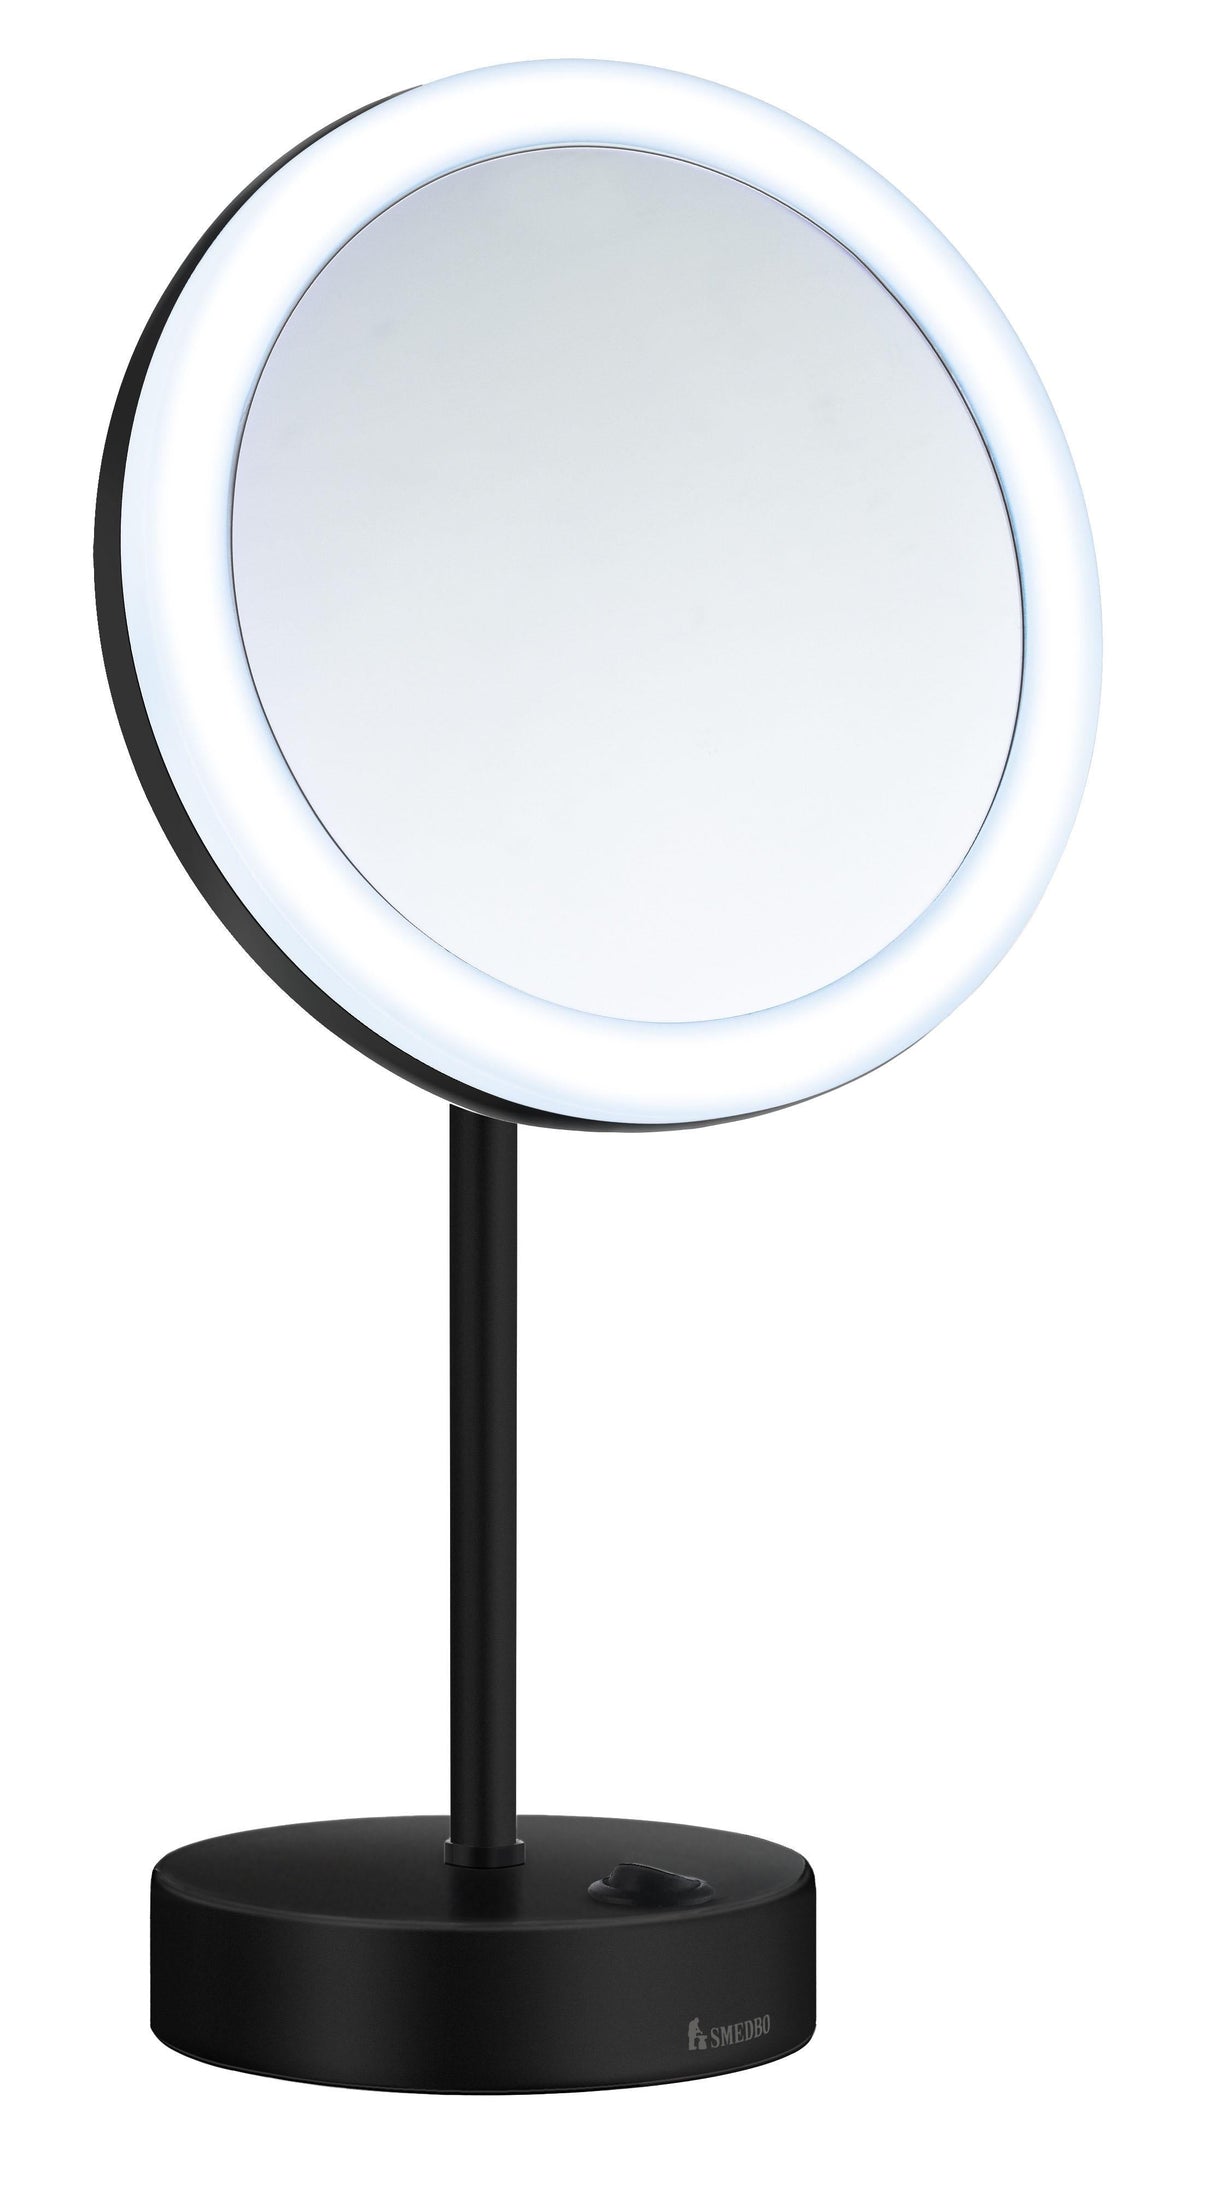 Smedbo Outline Shaving and Make-up Mirror with LED-technology dual light in Matte Black